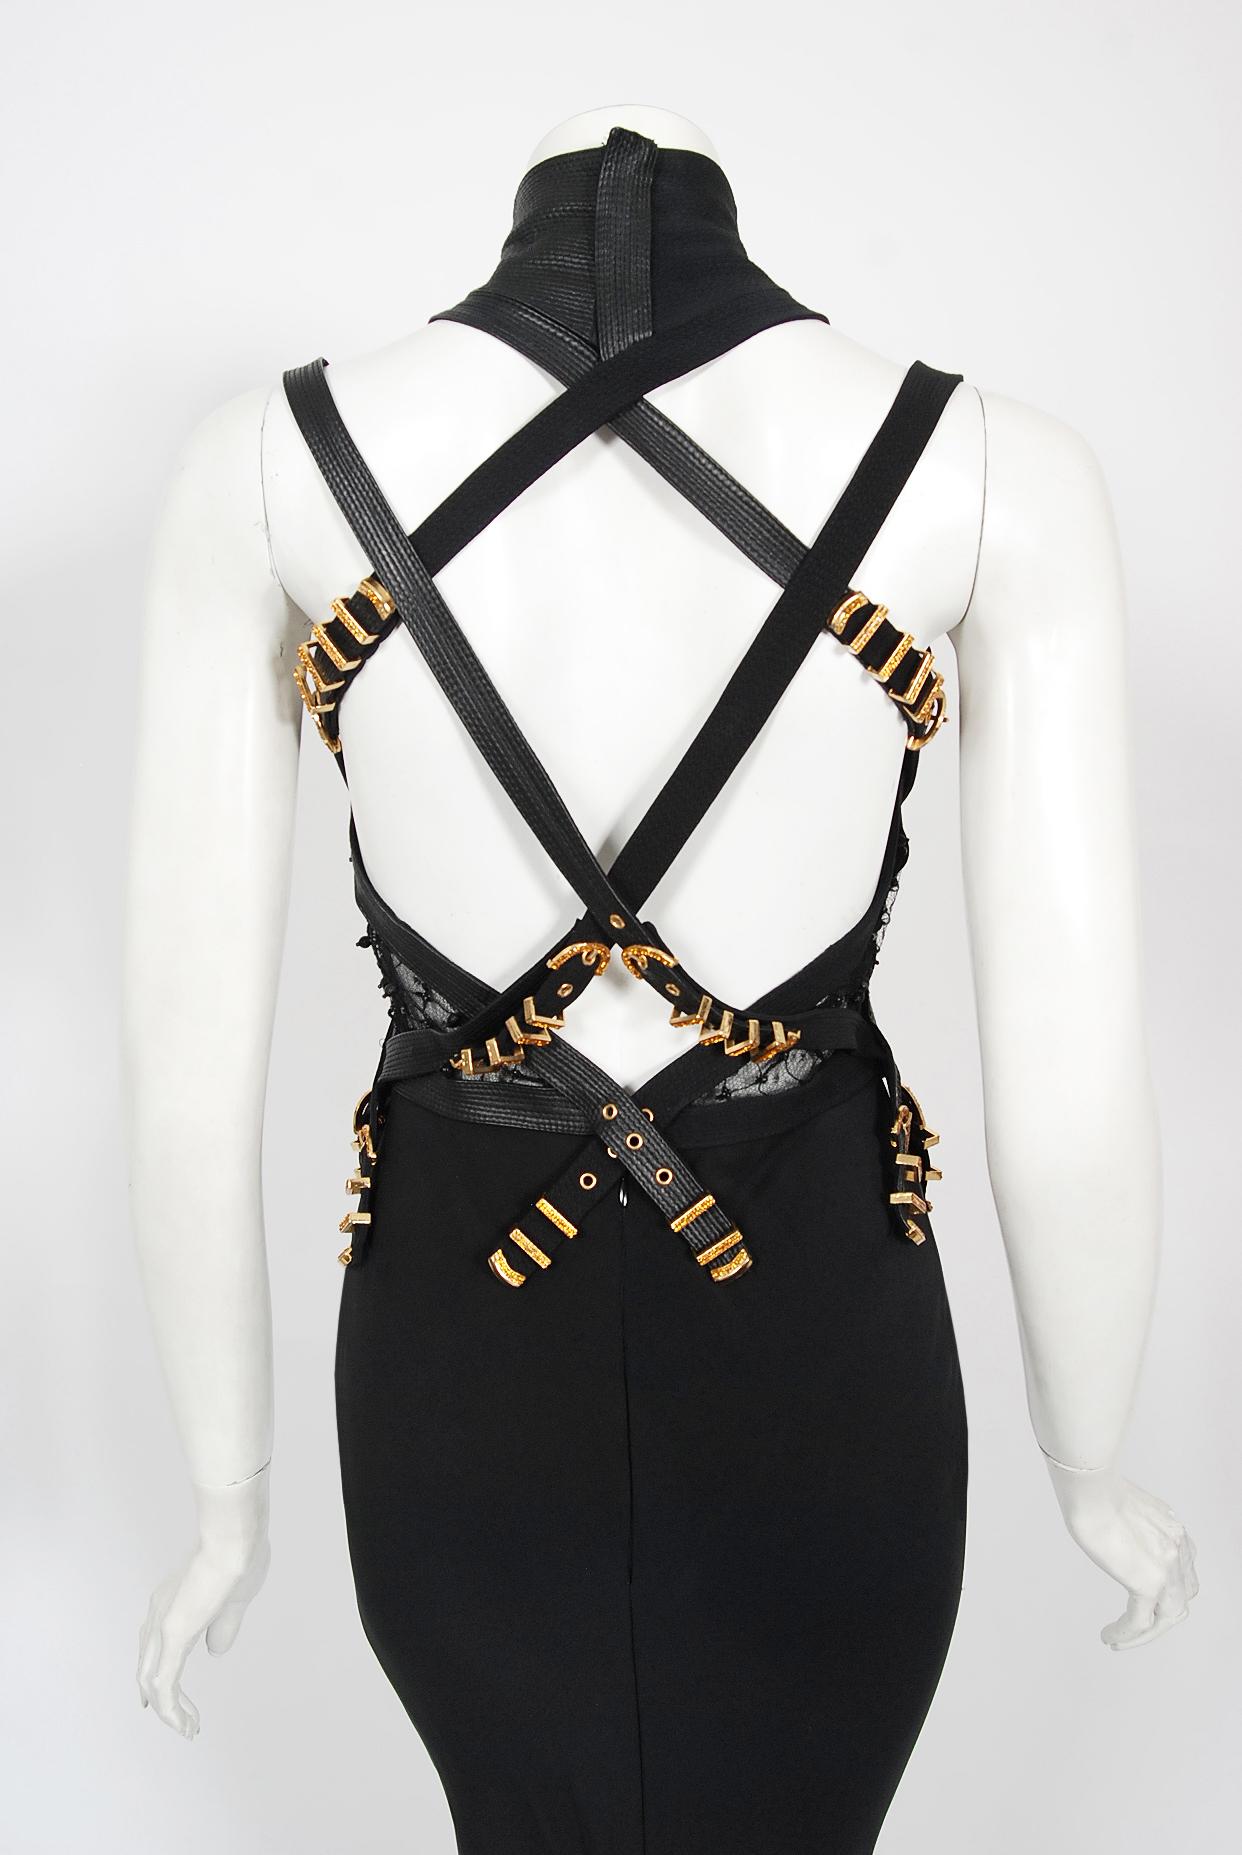 Iconic 1992 Gianni Versace Couture Documented Black Bondage Silk Leather Gown  For Sale 11